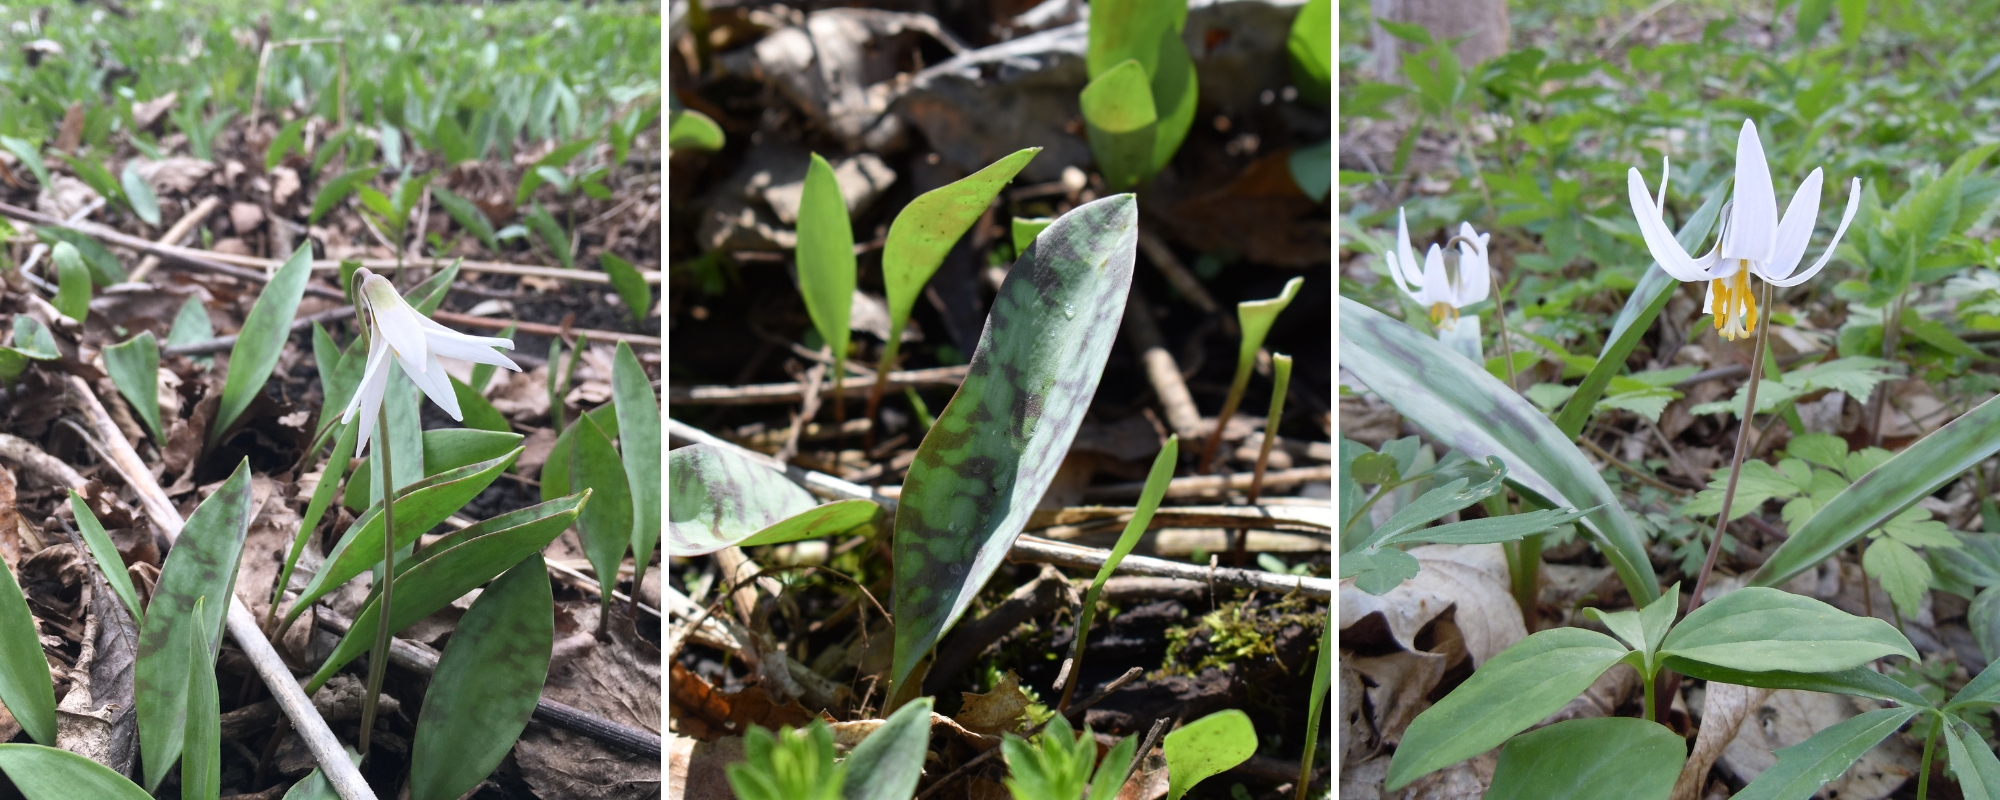 Photos of white trout lily